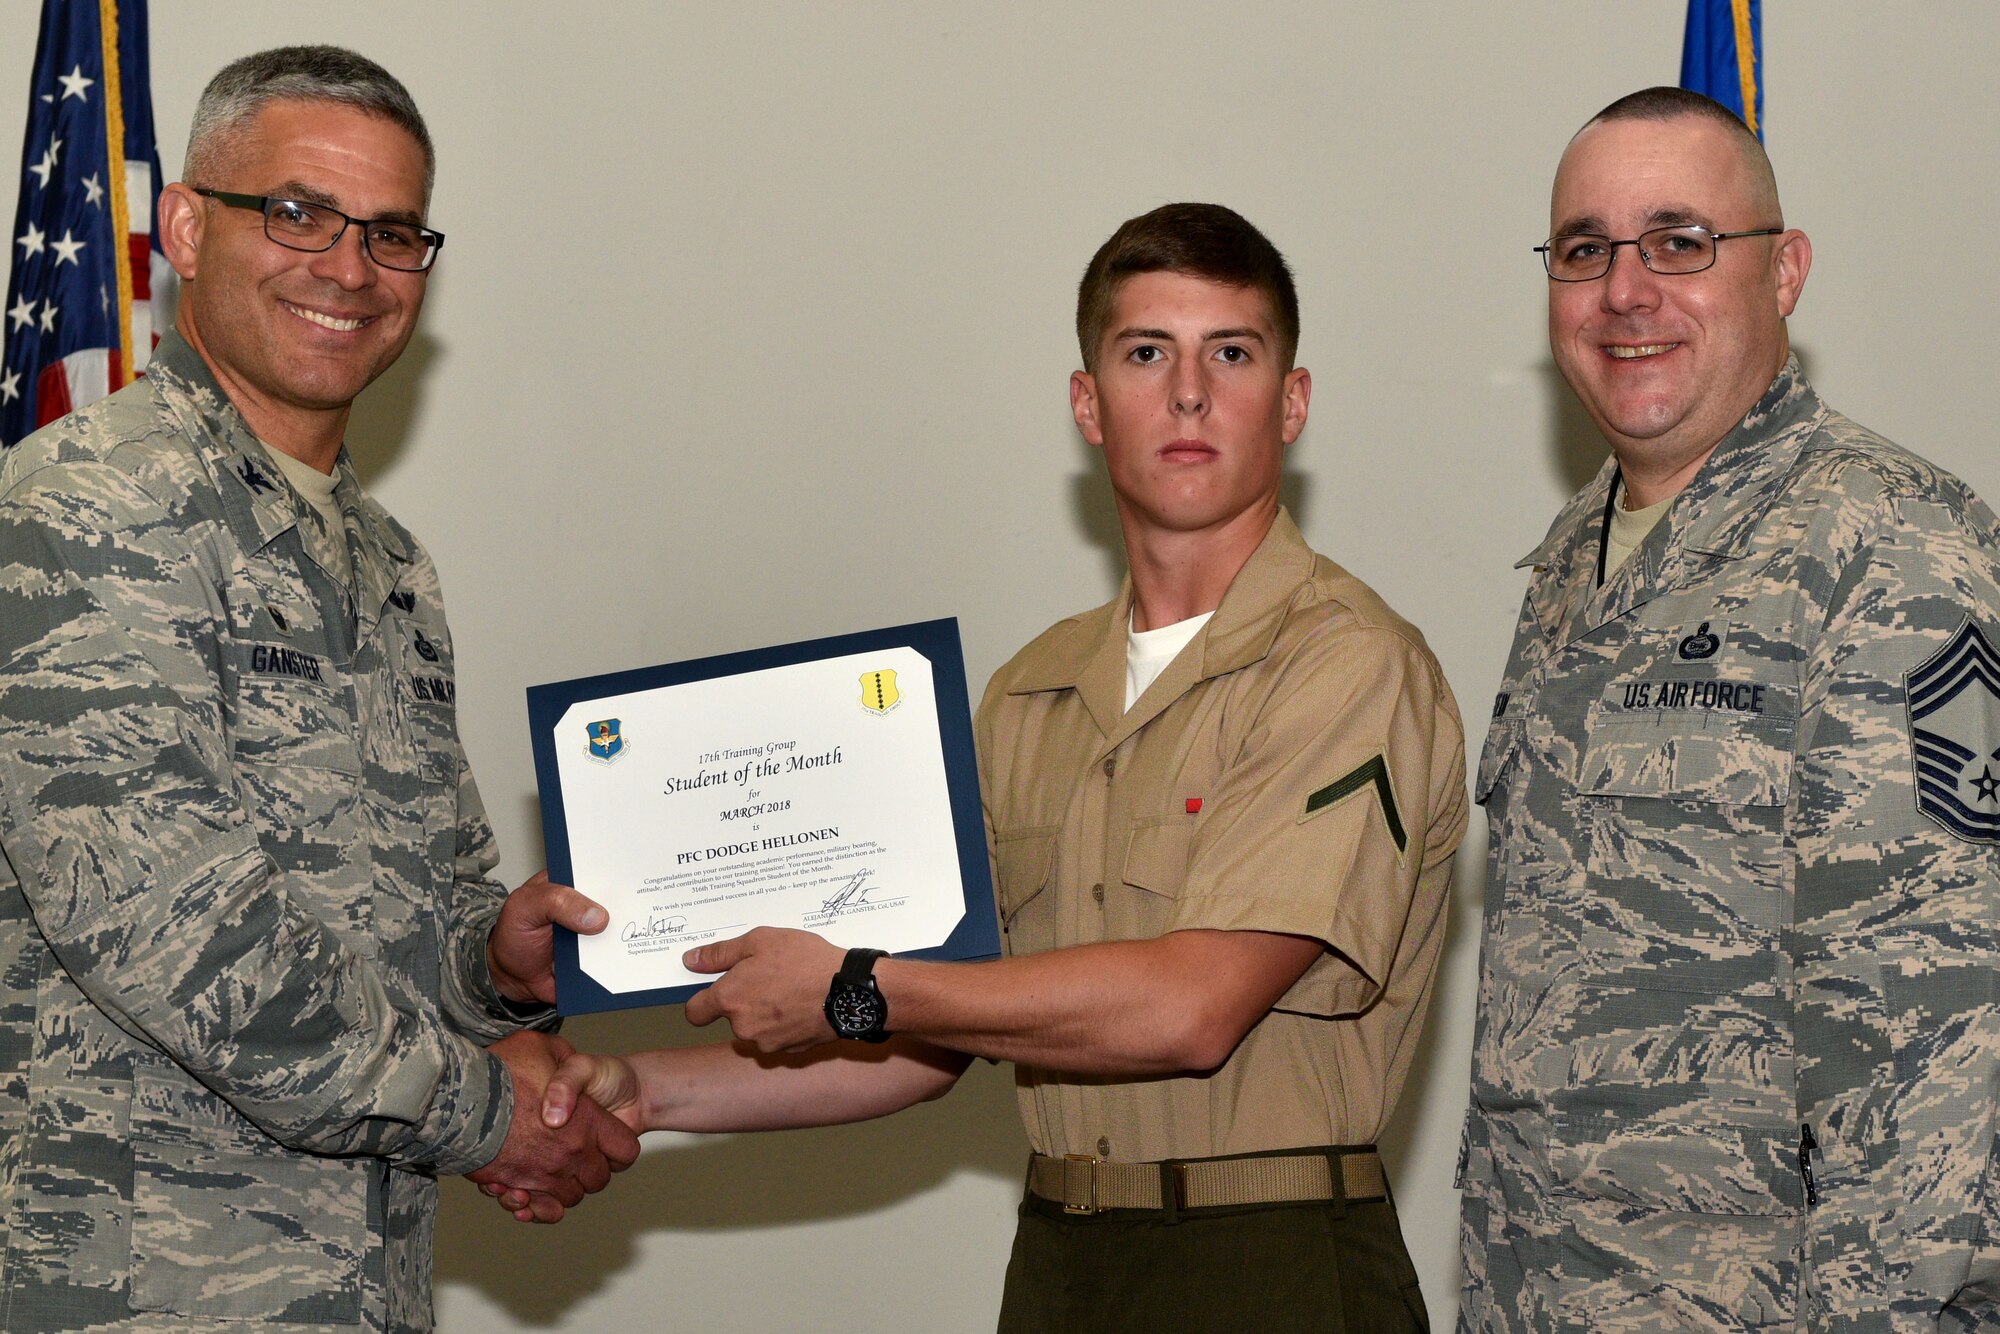 U.S. Air Force Col. Alex Ganster, 17th Training Group commander, and Chief Master Sgt. Daniel Stein, 17th TRG superintendent, present the 316th Training Squadron Student of the Month certificate to U.S. Marine Corps Pfc. Dodge Hellonen, 316th TRS trainee, in the Event Center on Goodfellow Air Force Base, Texas, April 6, 2018. The 316th TRS’s mission is to conduct U.S. Air Force, U.S. Army, U.S. Marine Corps, U.S. Navy and U.S. Coast Guard cryptologic, human intelligence and military training. (U.S. Air Force photo by Senior Airman Randall Moose/Released)